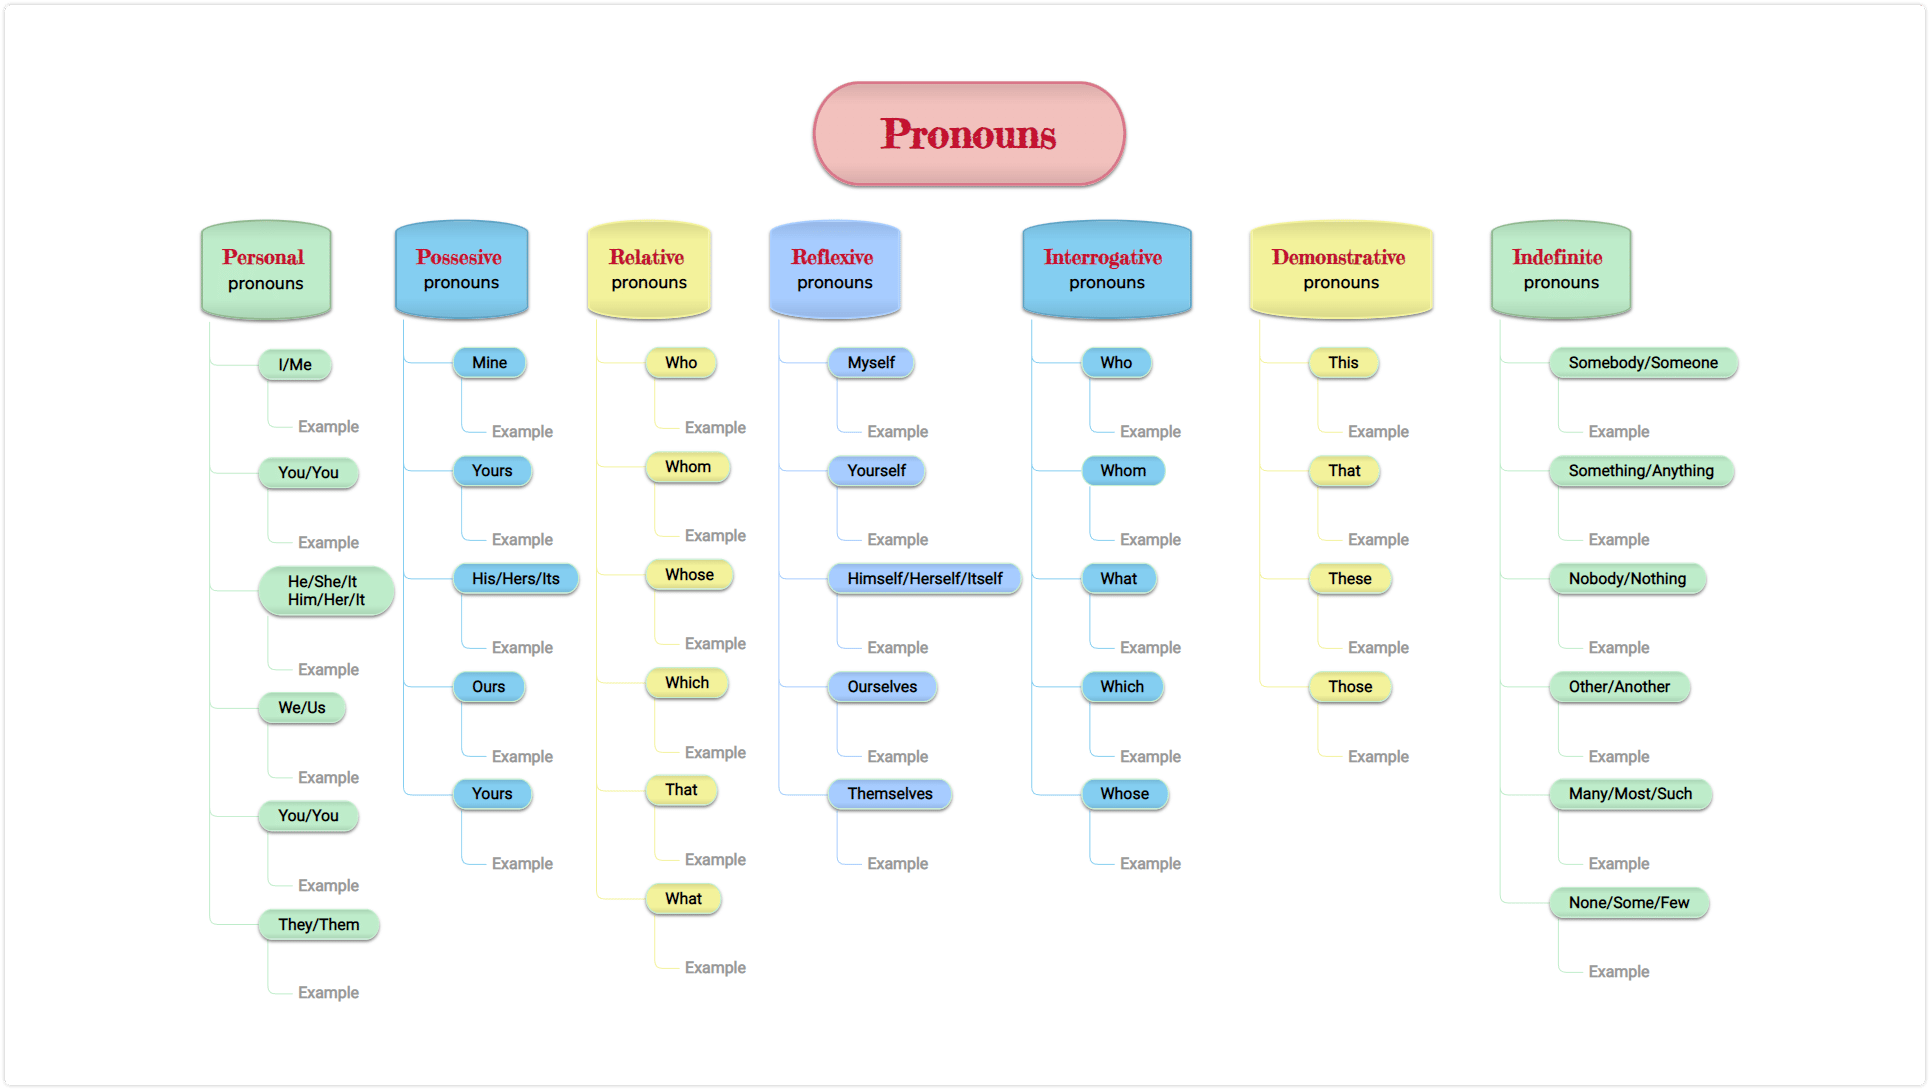 Learn pronouns and other languages using mind maps